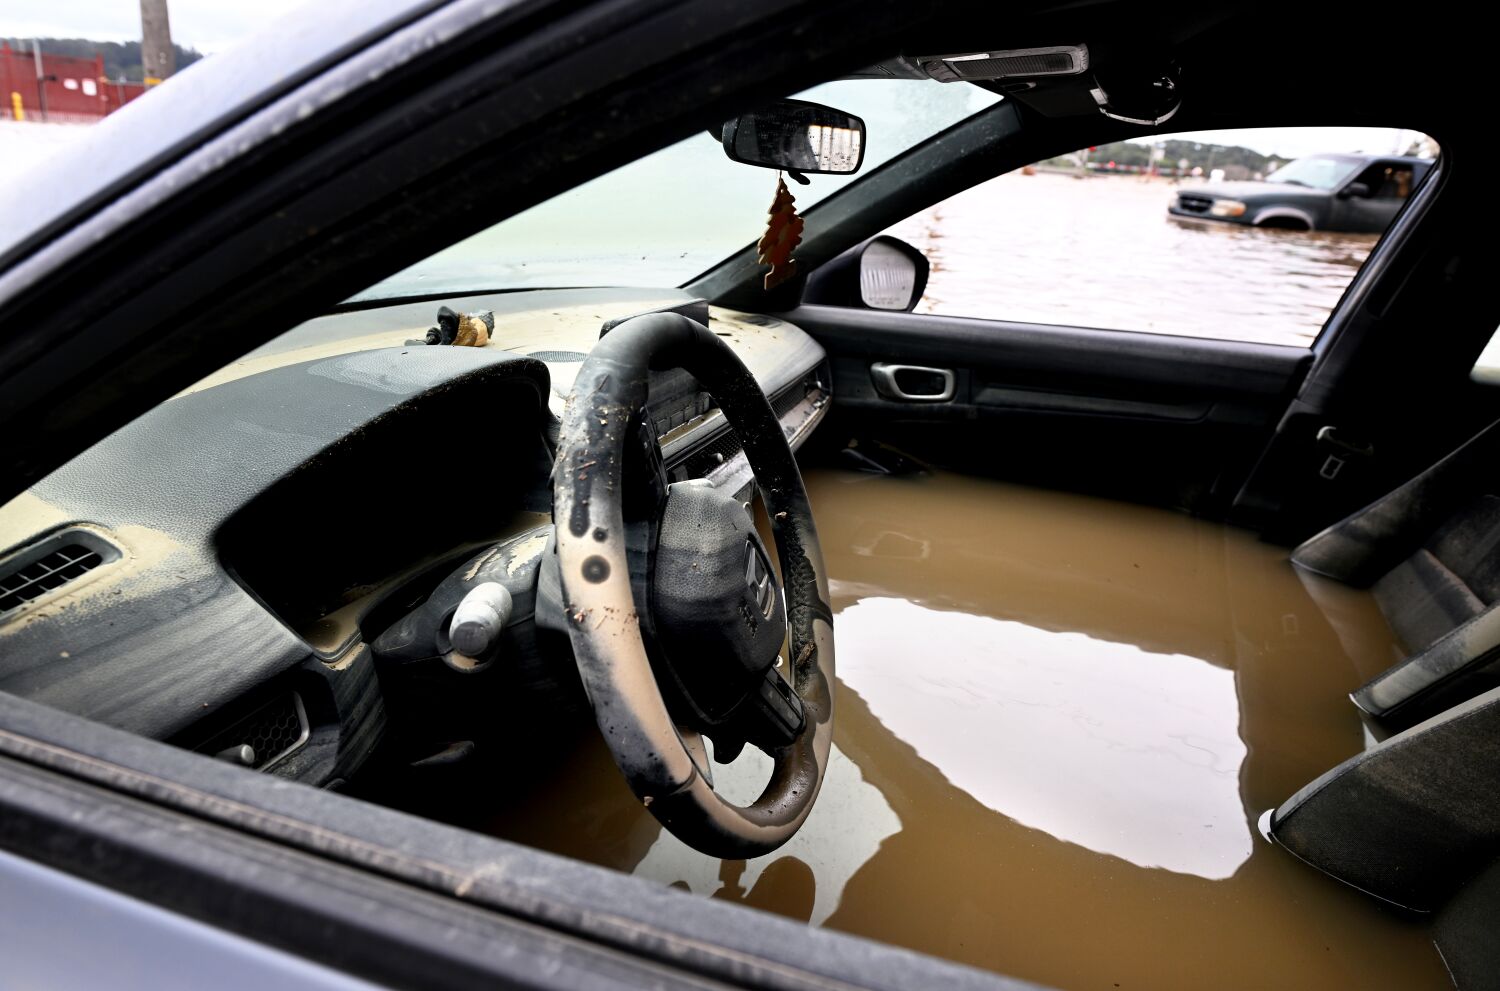 The Times podcast: The flooding in Pajaro, Calif. — and how it all could have been avoided